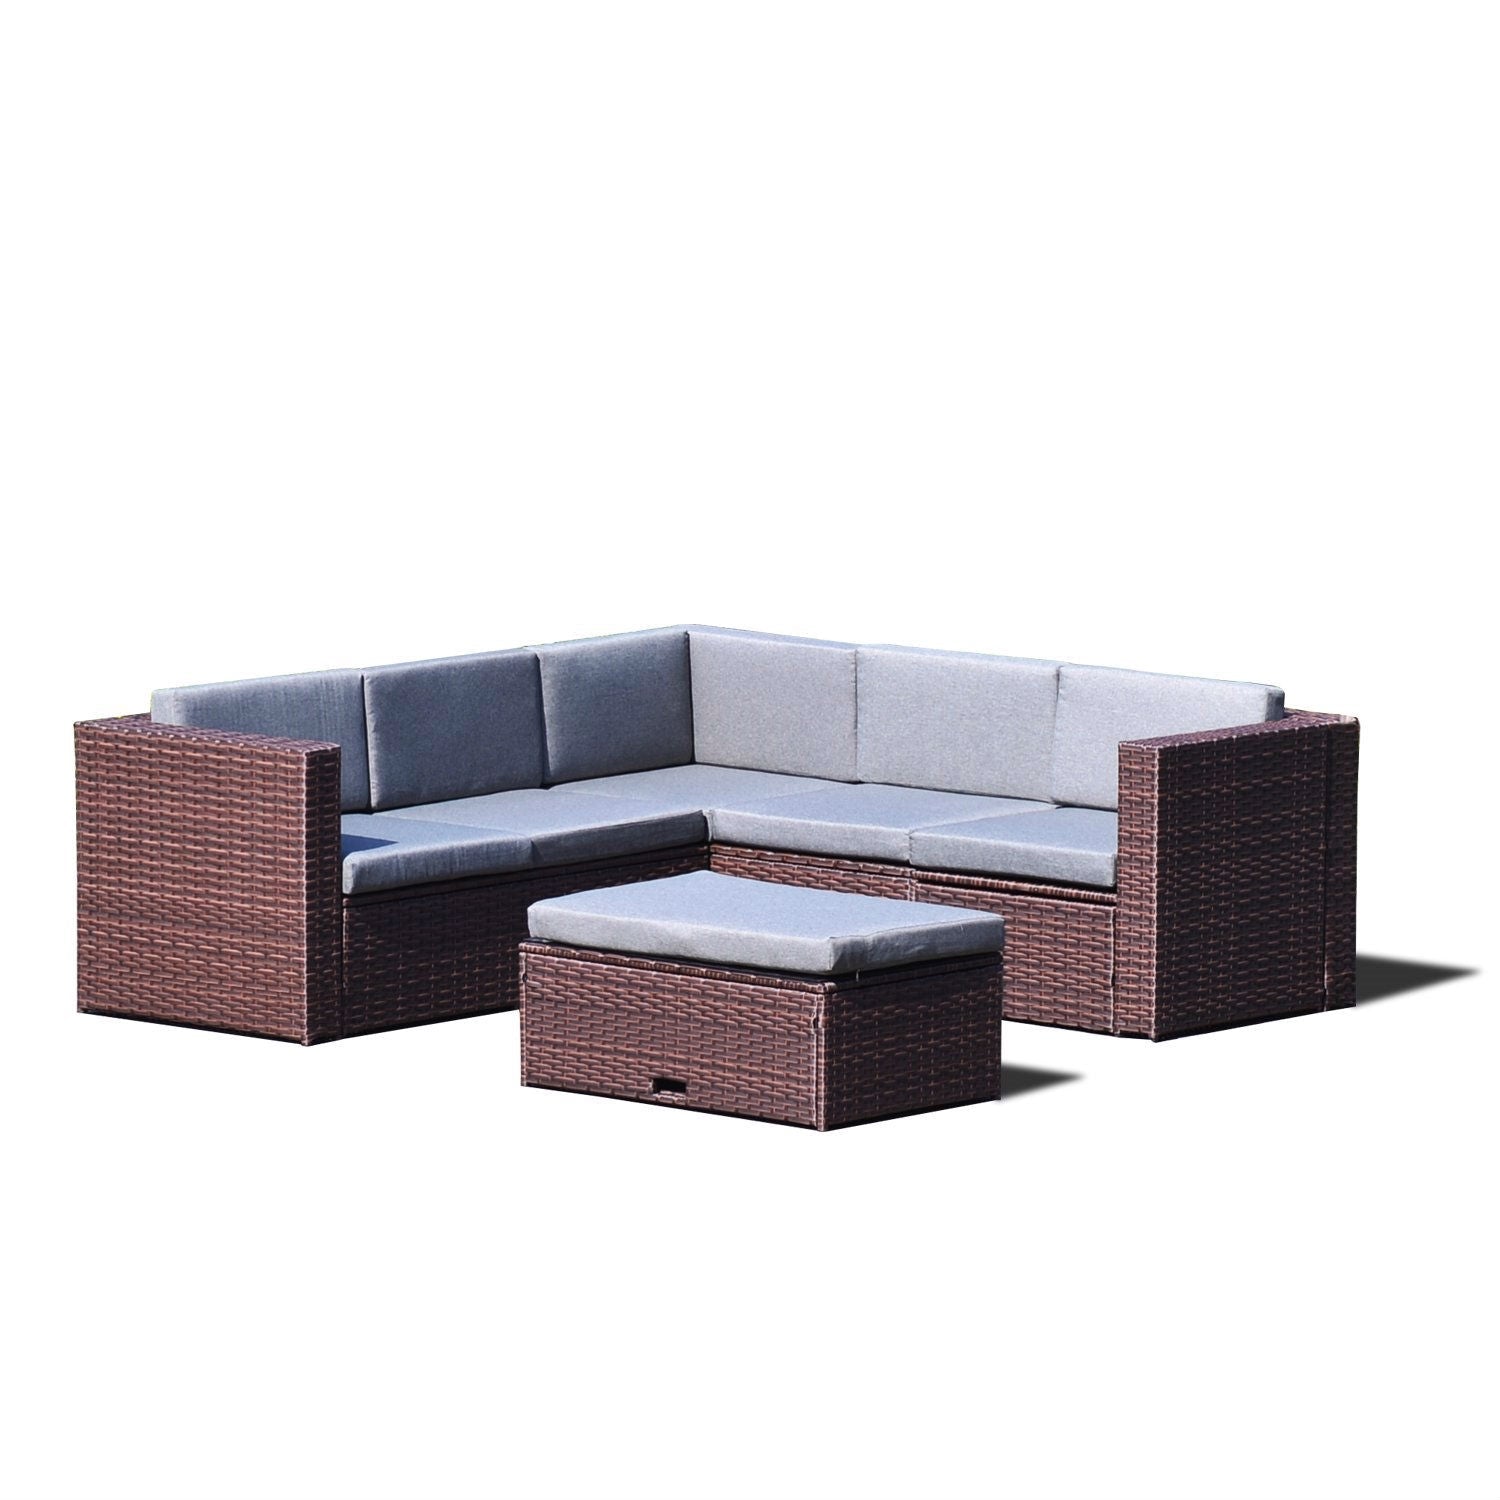 Outdoor > Outdoor Furniture > Patio Furniture Sets - Brown Resin Wicker 4-Piece Outdoor Patio Furniture Set With Grey Cushions